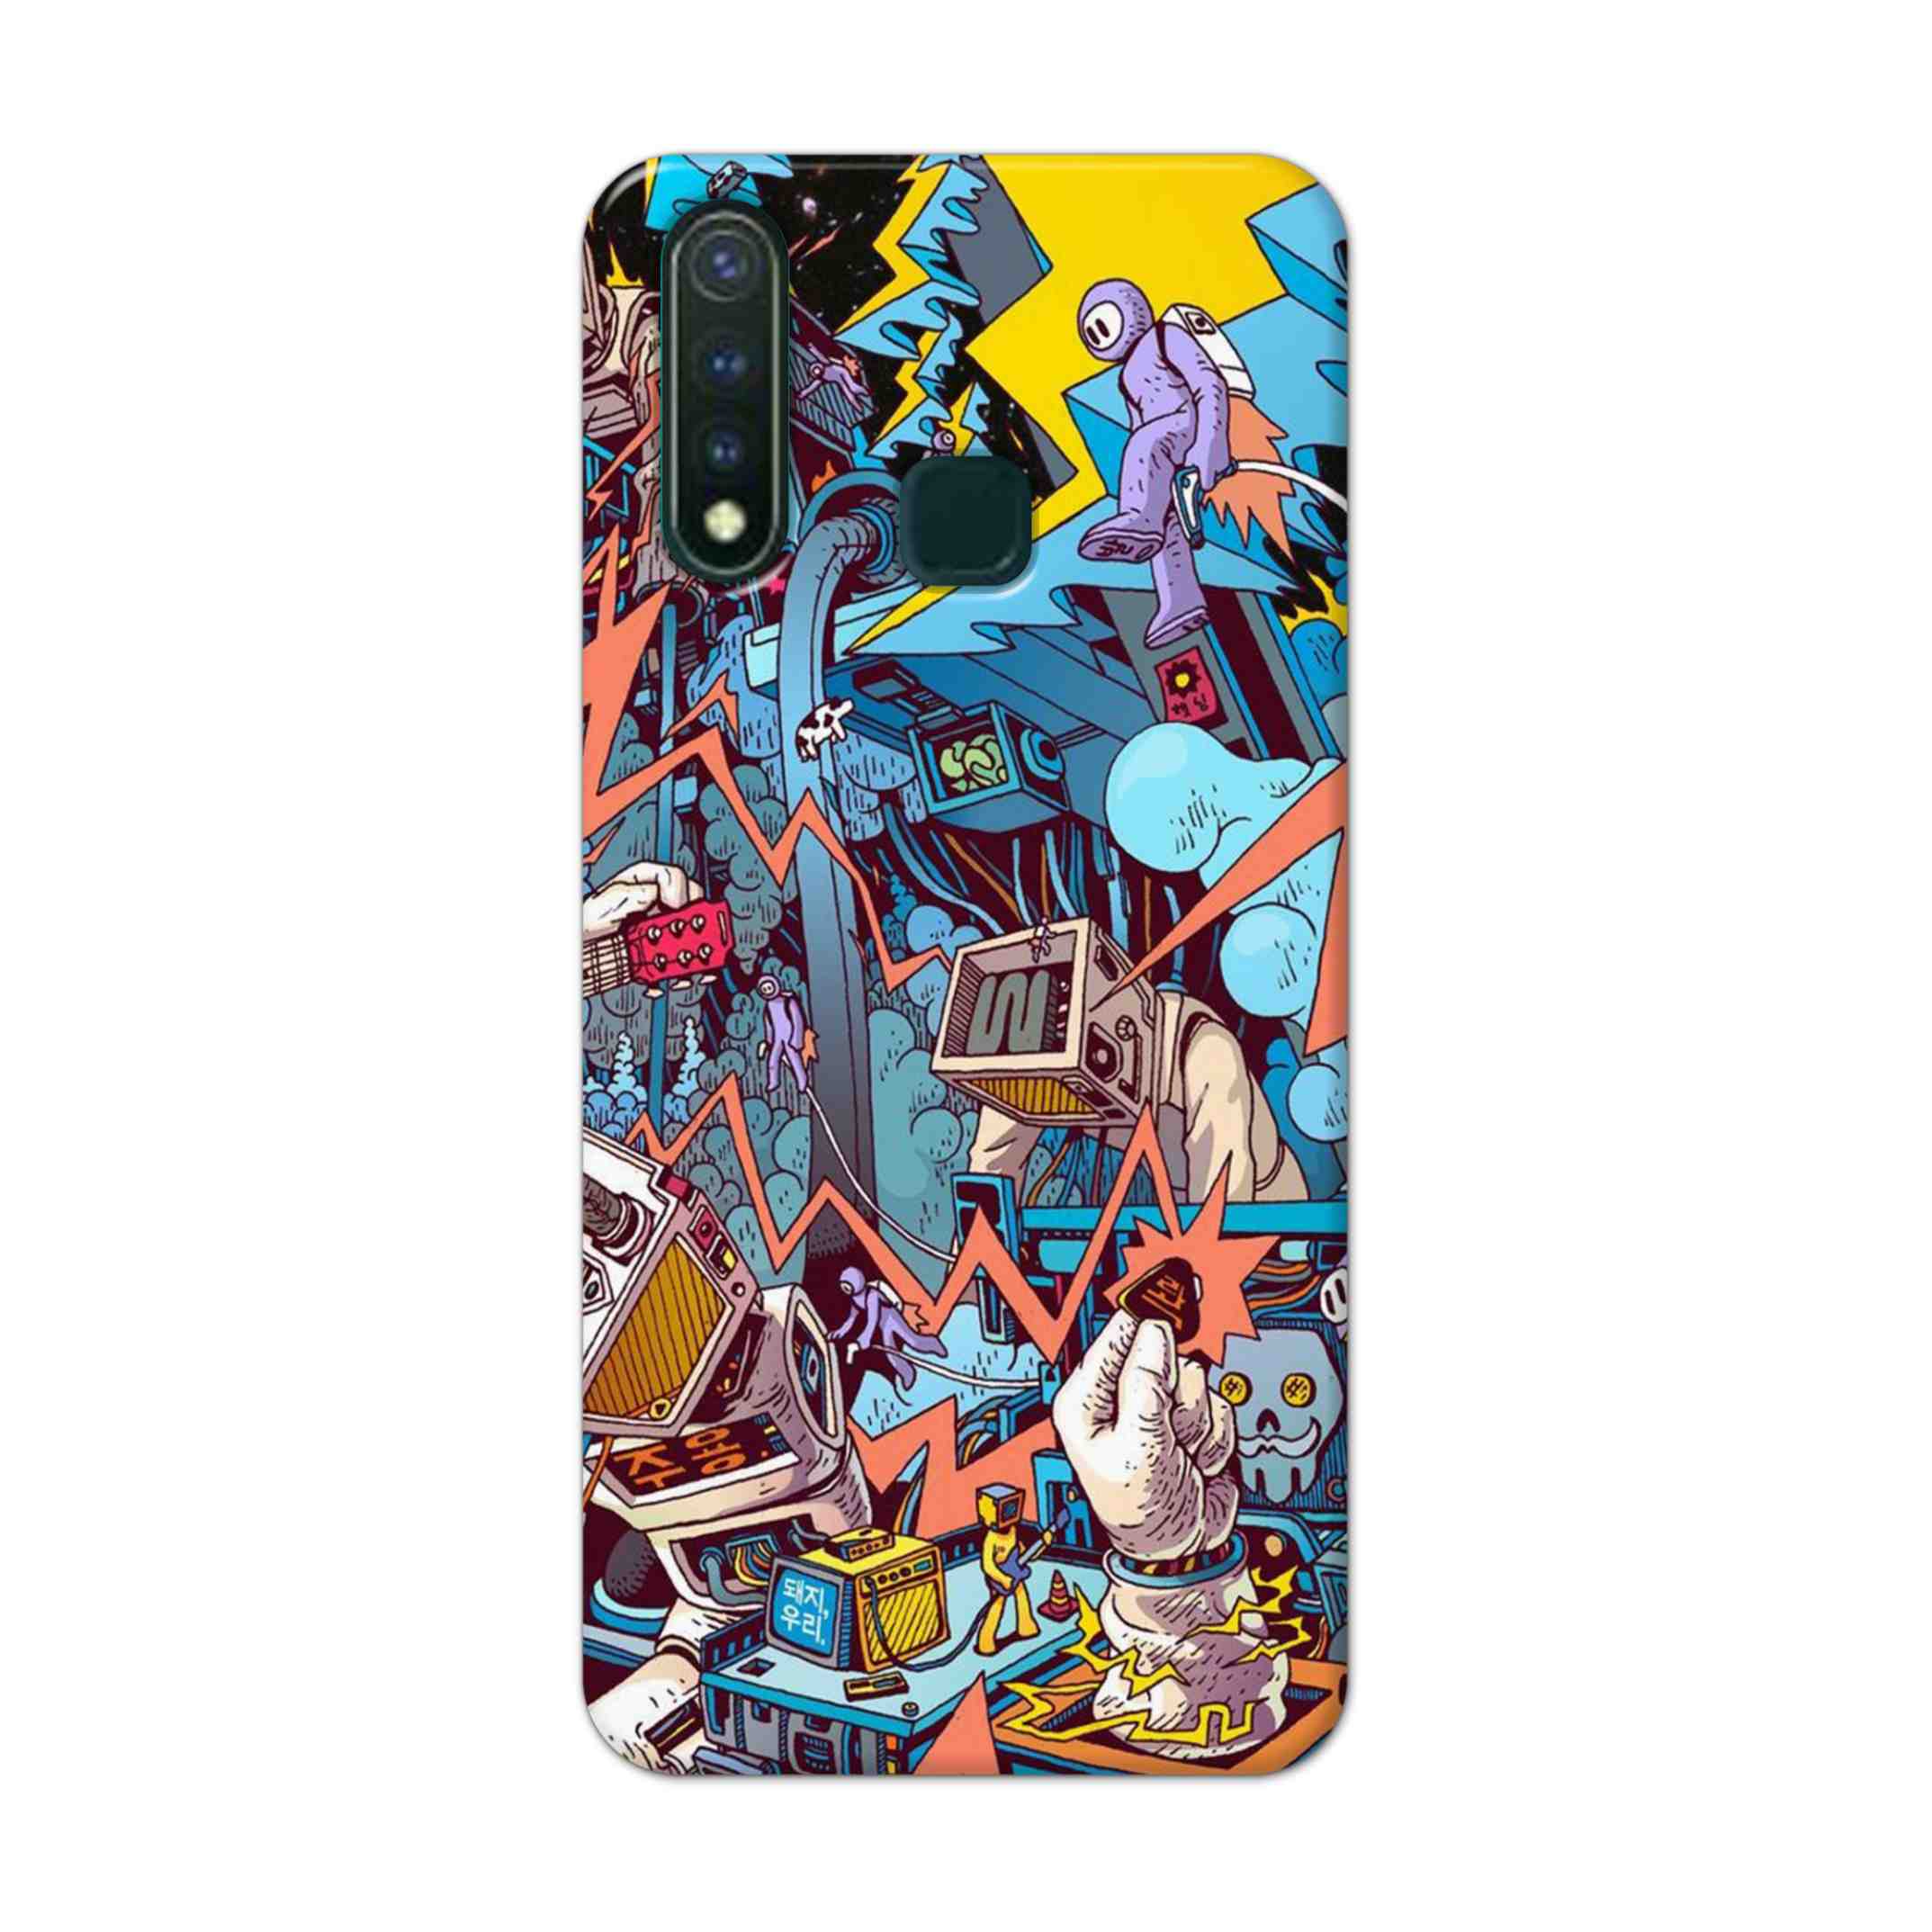 Buy Ofo Panic Hard Back Mobile Phone Case Cover For Vivo Y19 Online